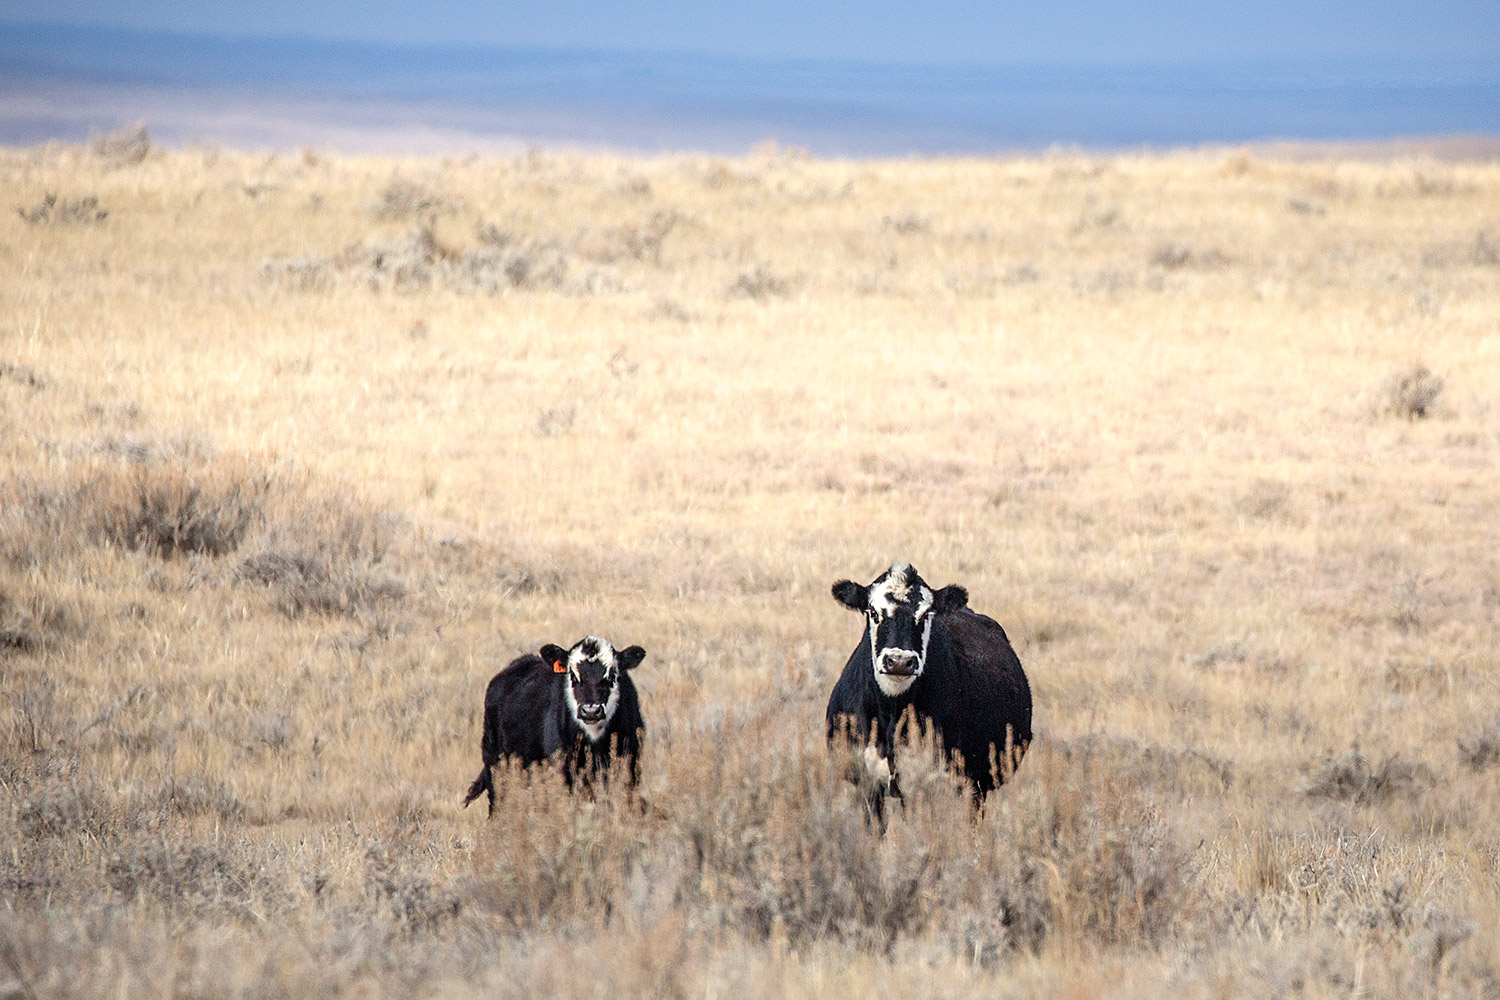 A cow and calf share similar markings near Whitewater, Montana. → Buy a Print or License Photo